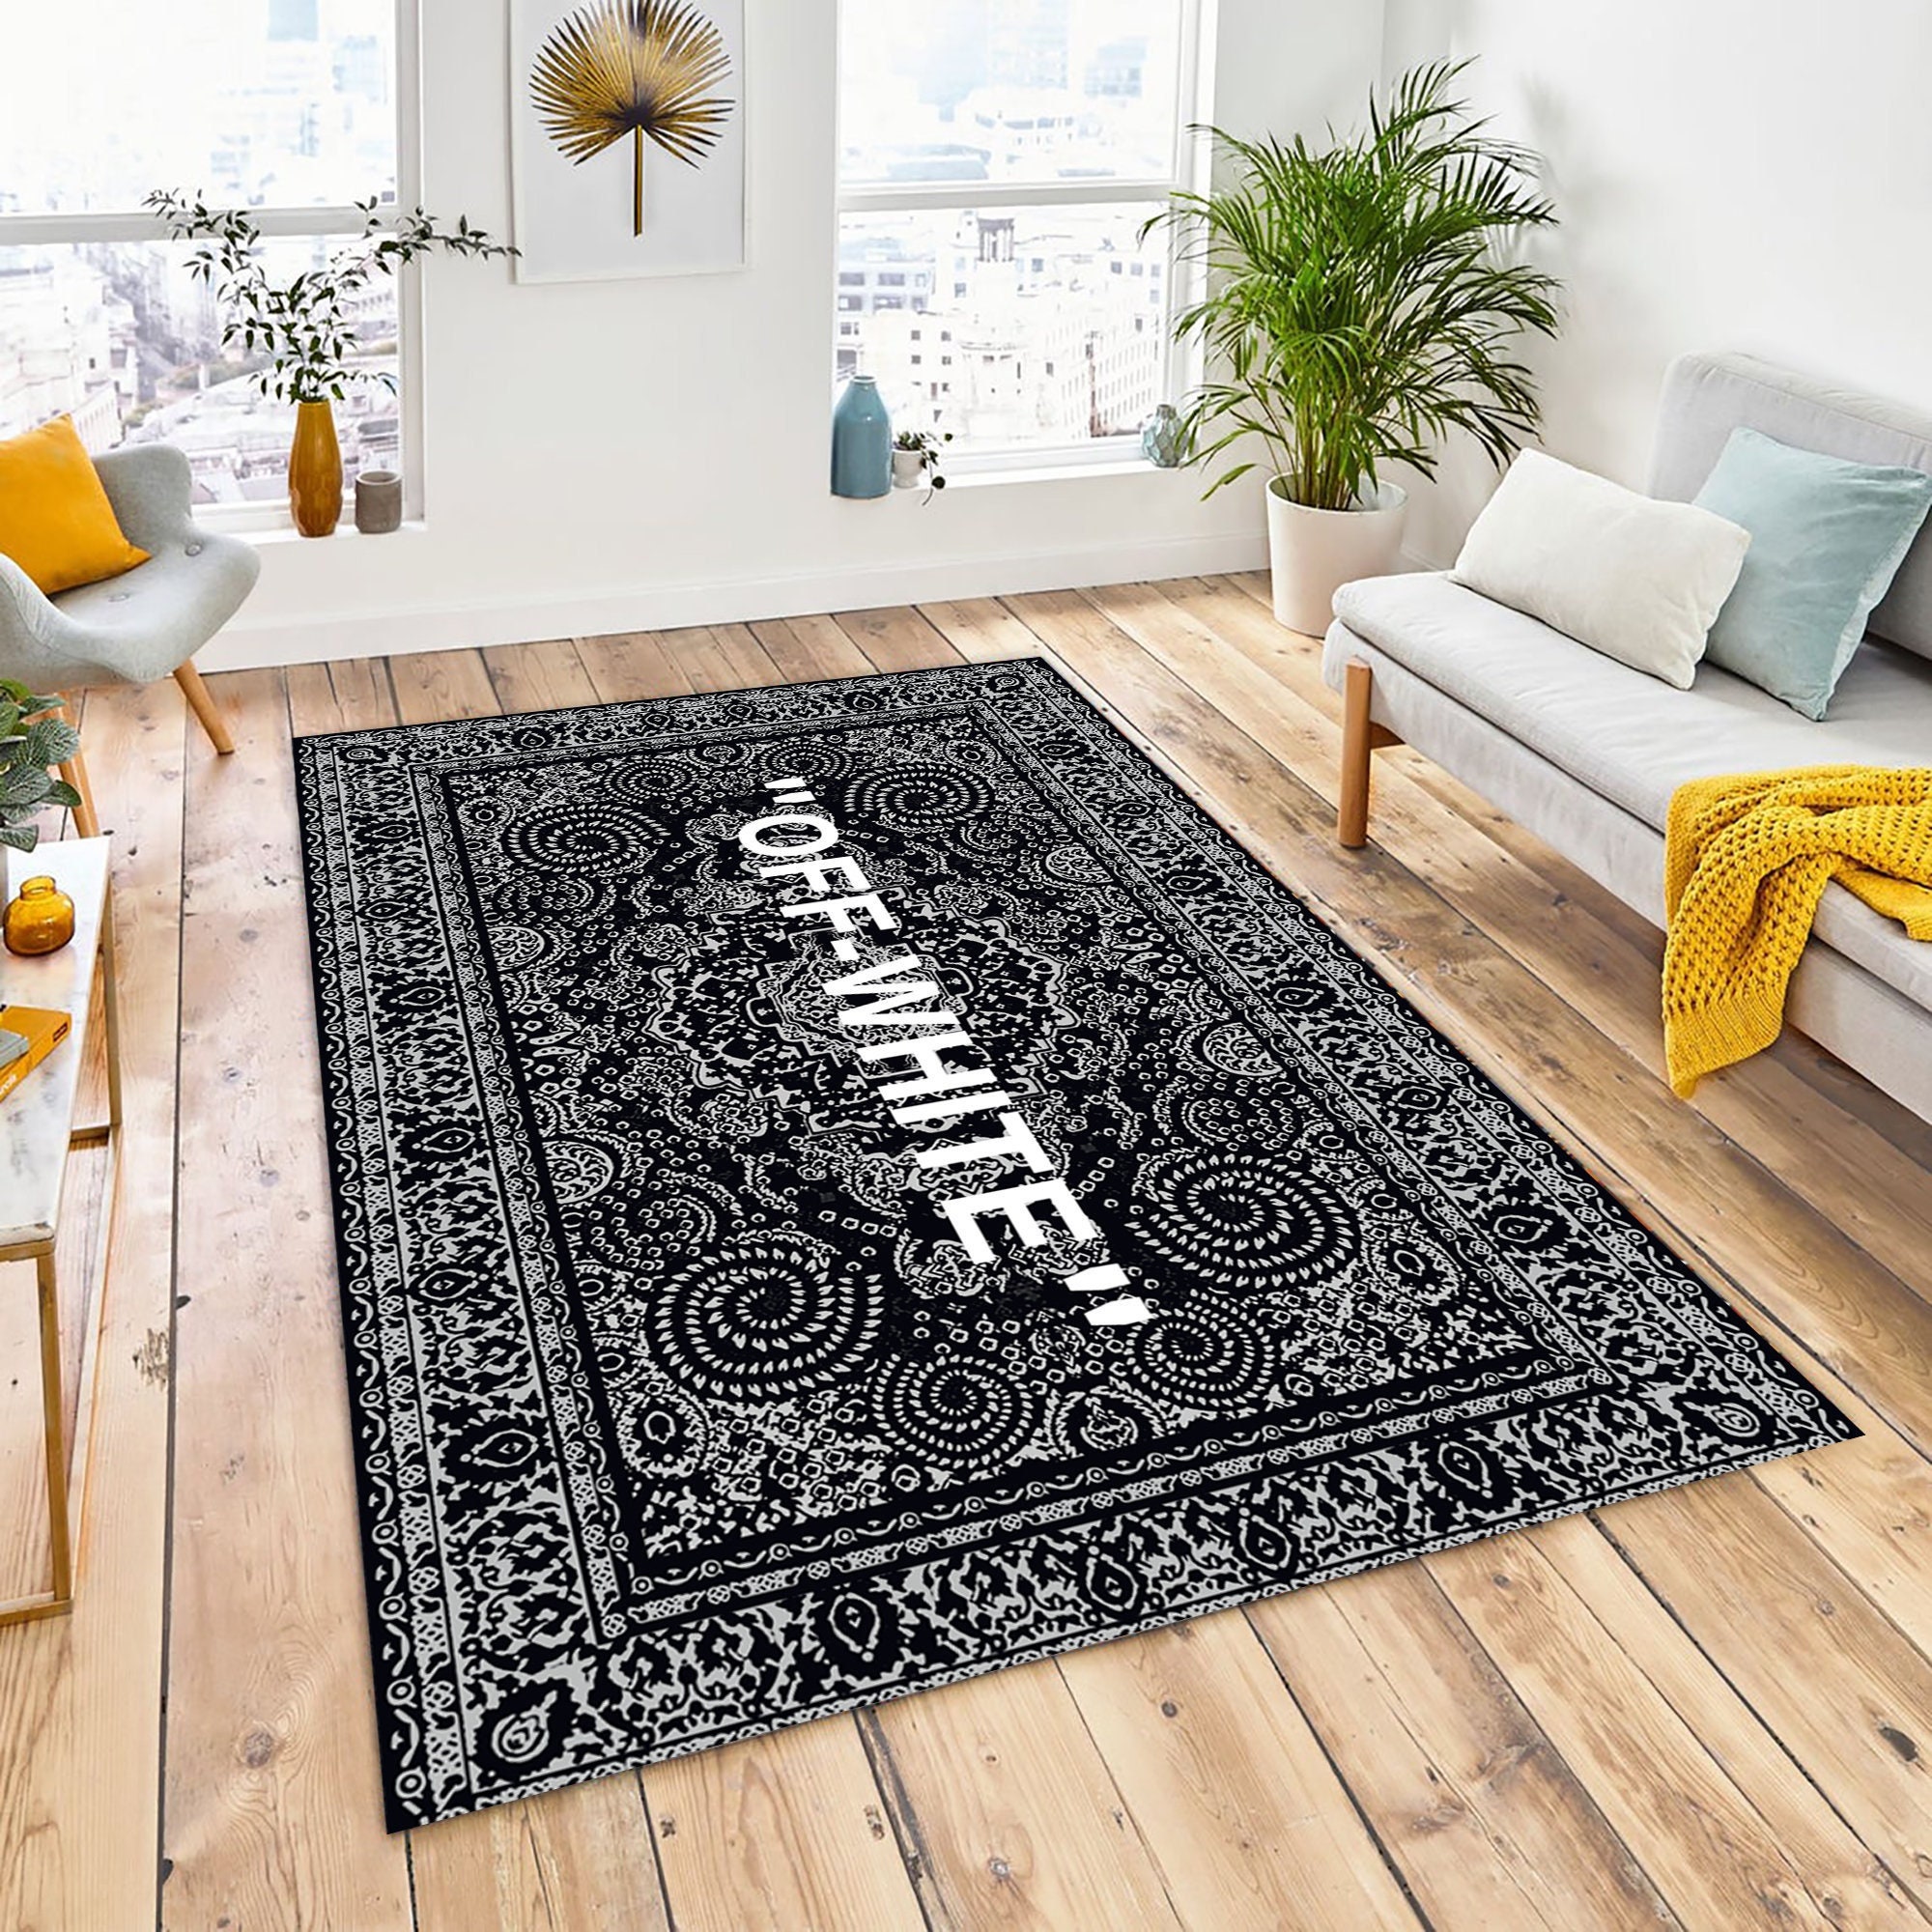 Off White off White Rug Keep off Rug Decorative Rugrugs for Living